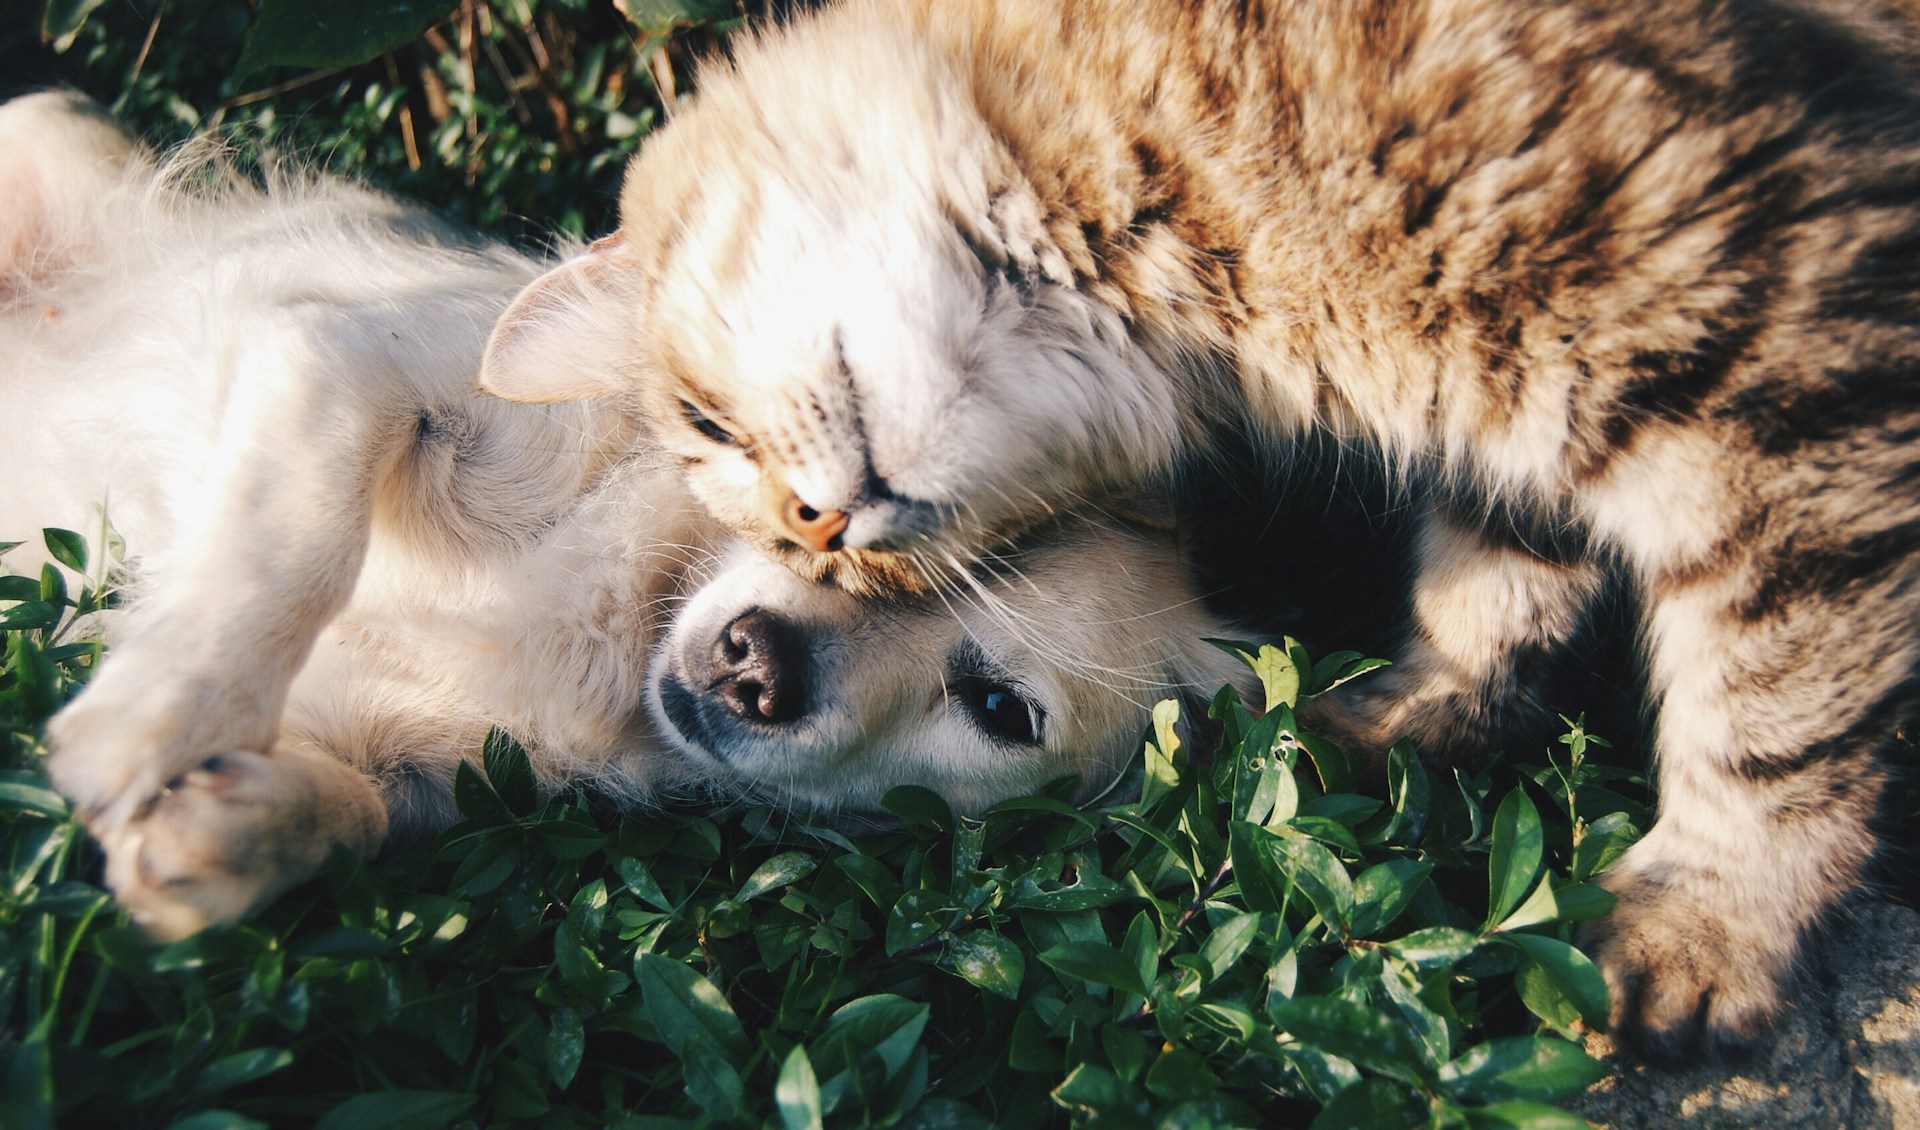 dog and cat cuddling in grass